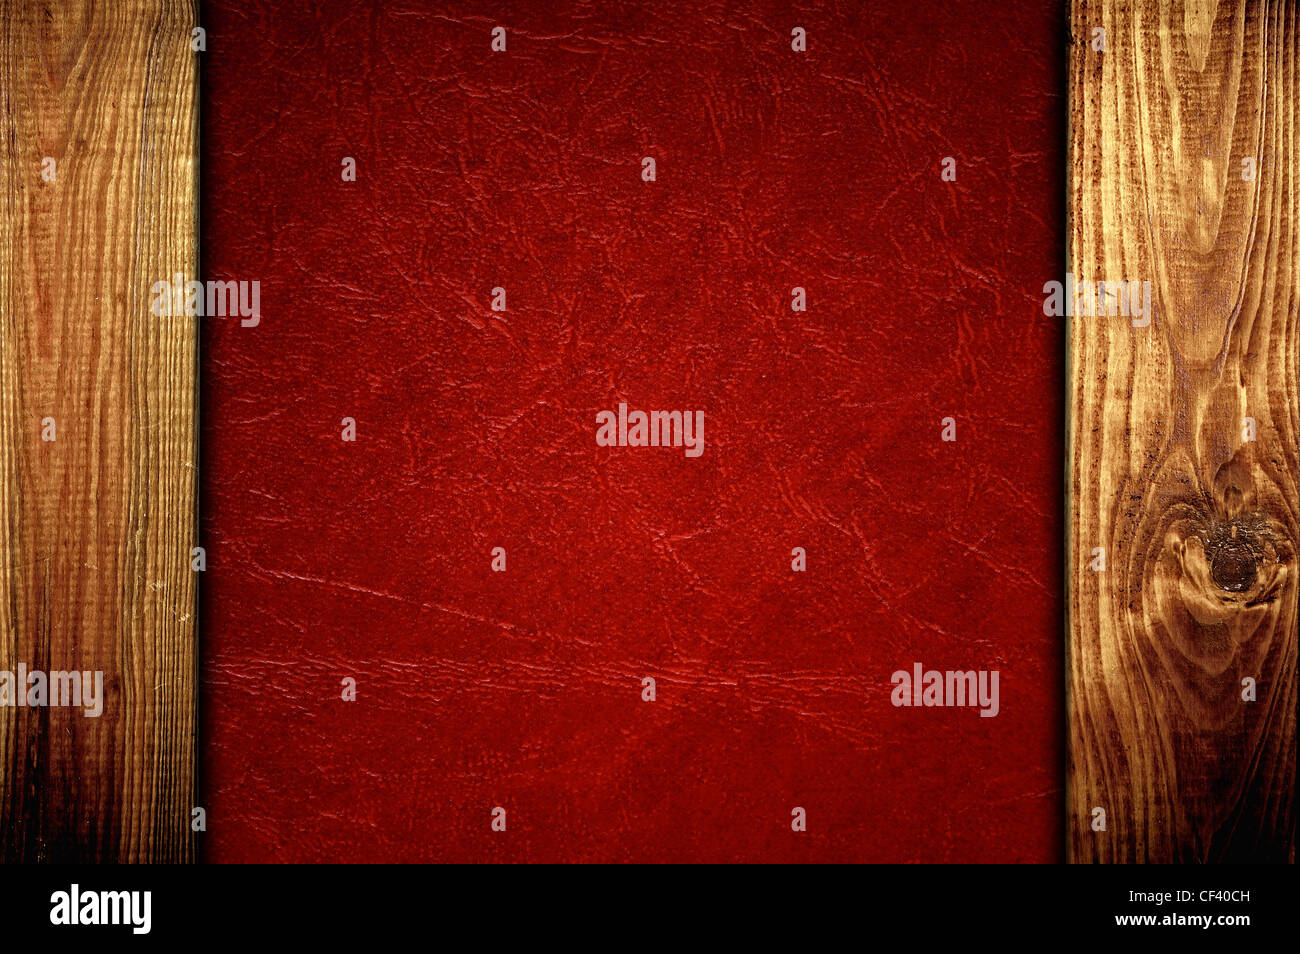 The red leather with wooden panels background texture Stock Photo